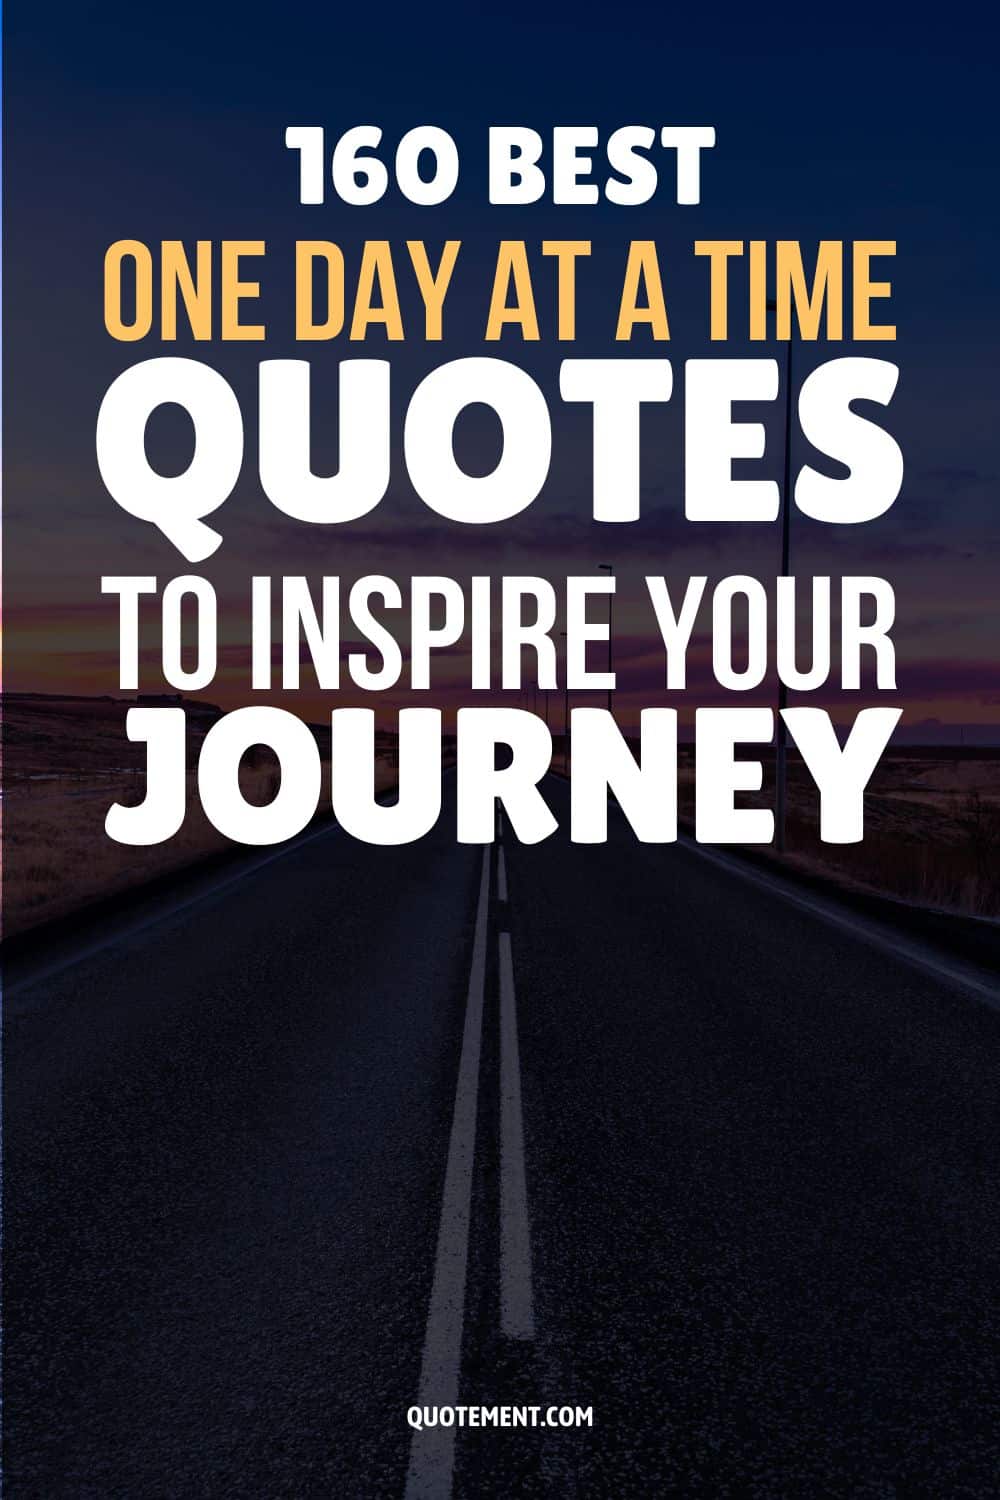 160 Best One Day At A Time Quotes To Inspire Your Journey